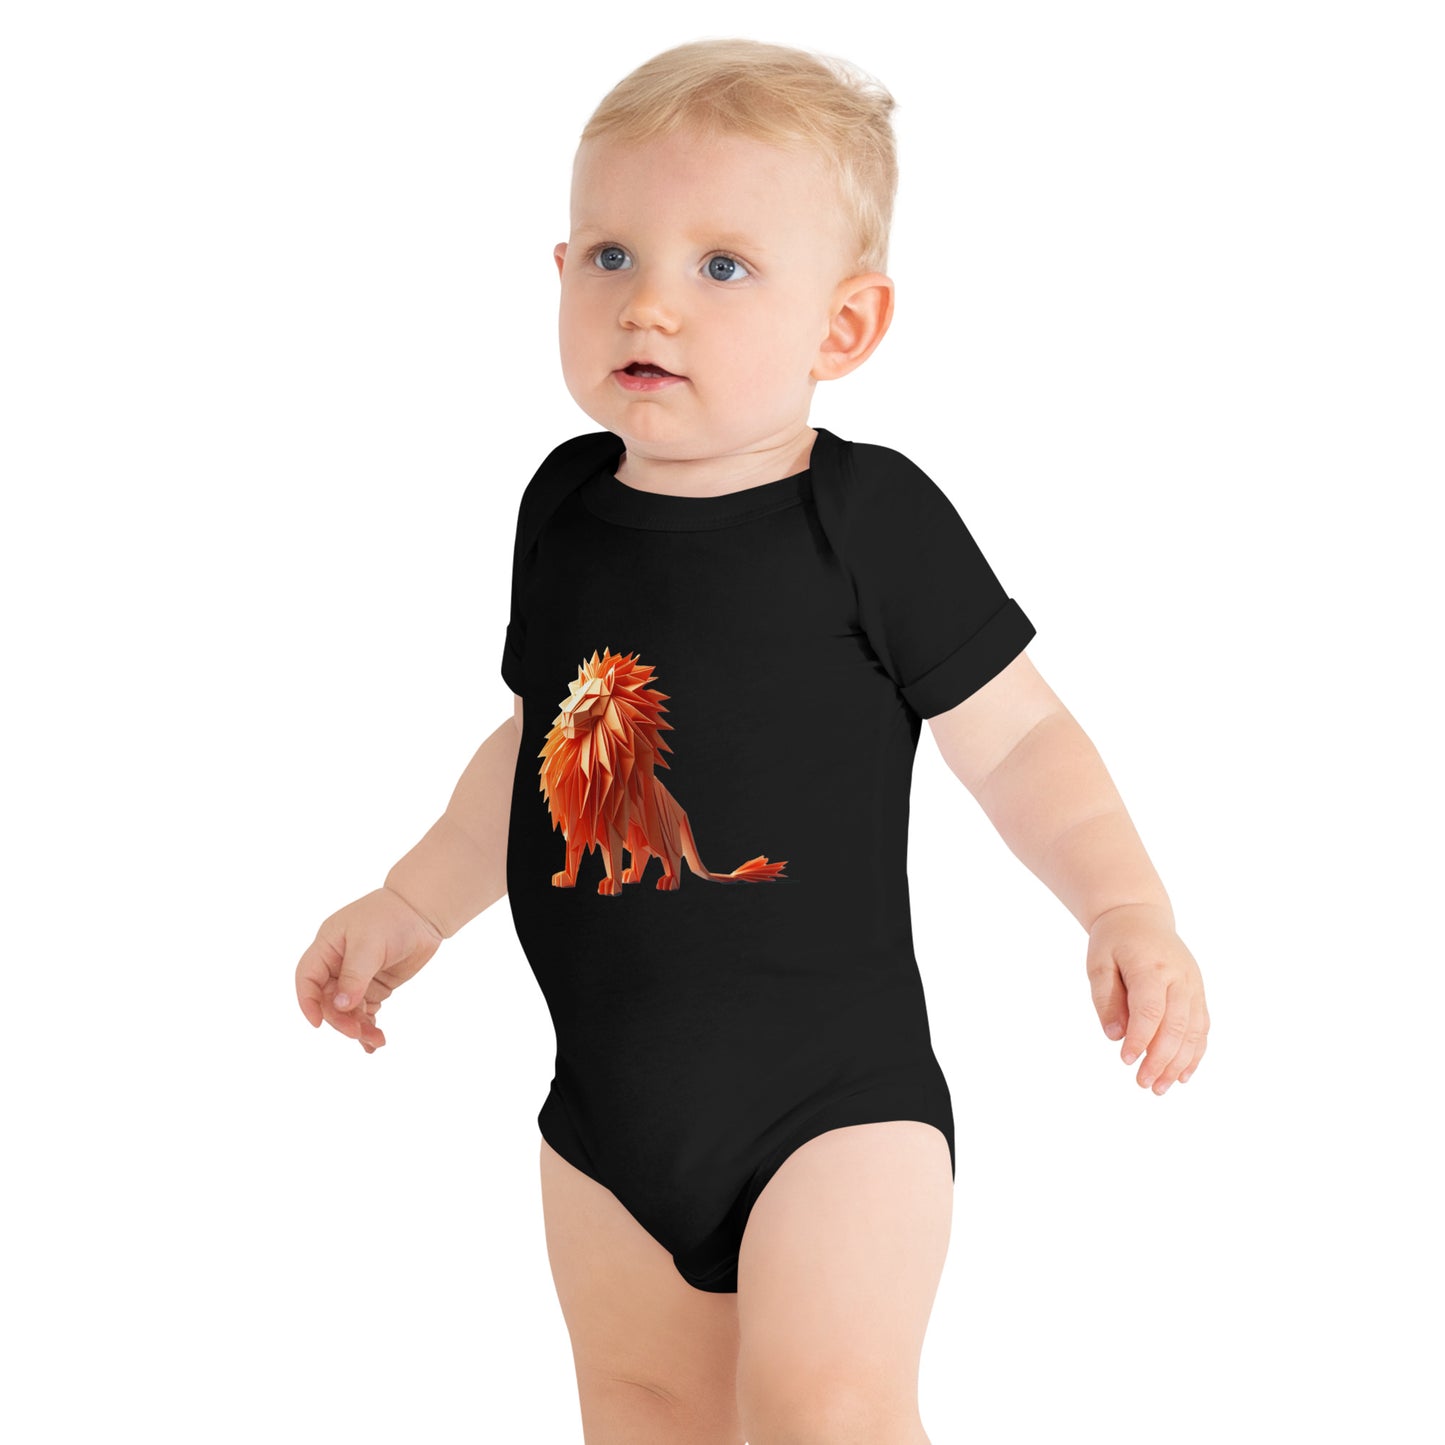 Baby with a black bodysuit with a print of a lion